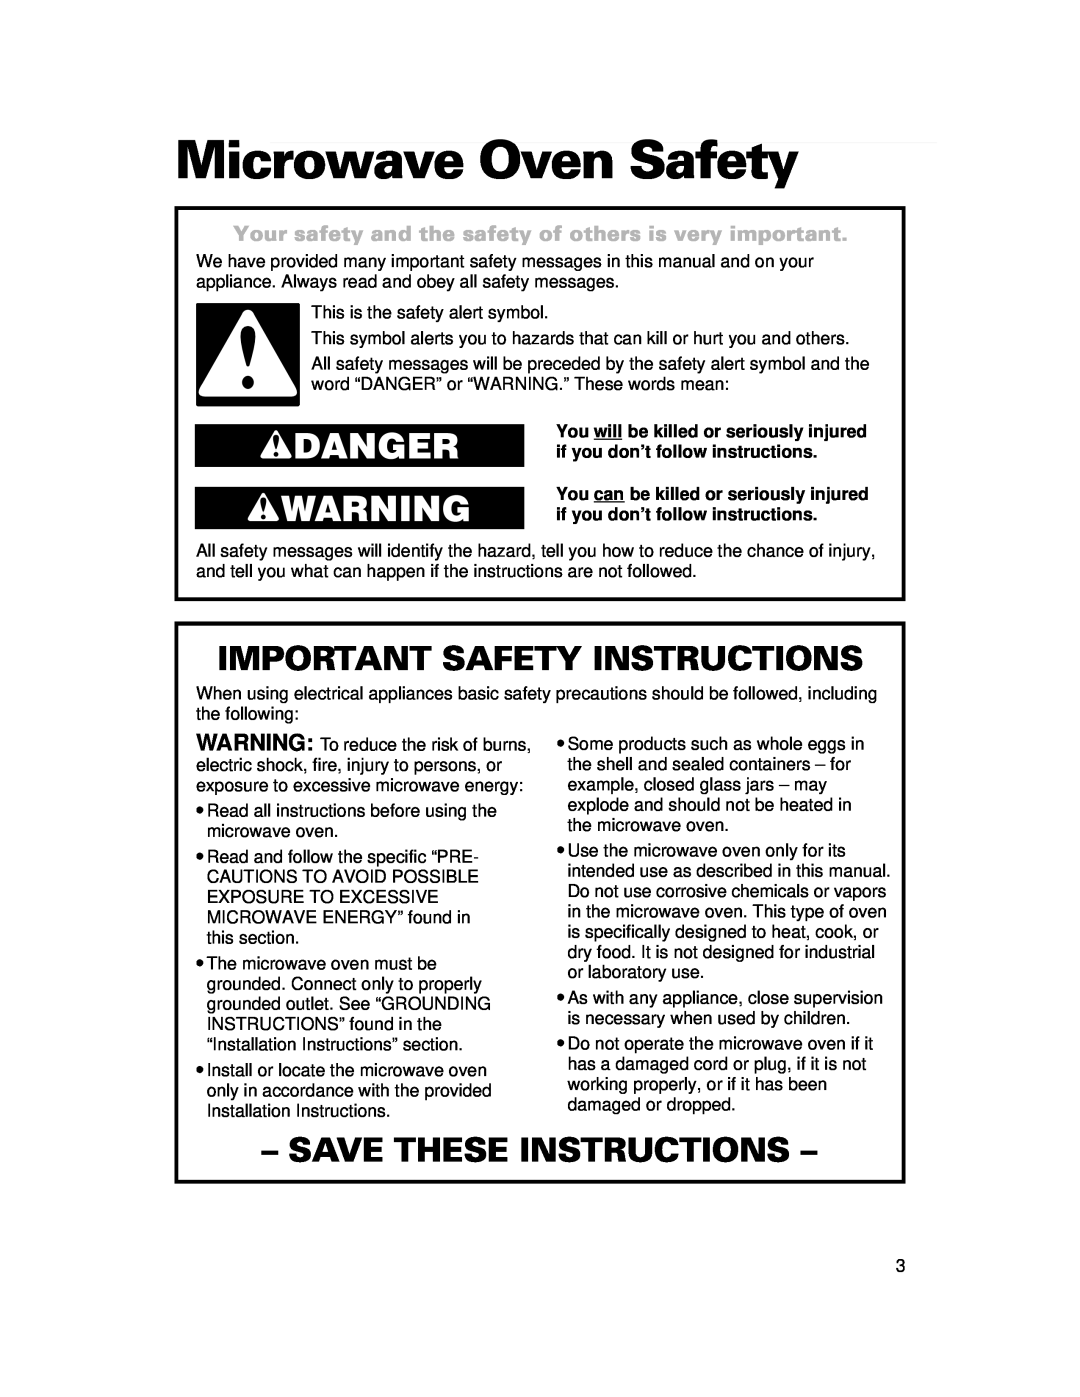 Whirlpool CMT061SG Microwave Oven Safety, wDANGER wWARNING, Important Safety Instructions, Save These Instructions 